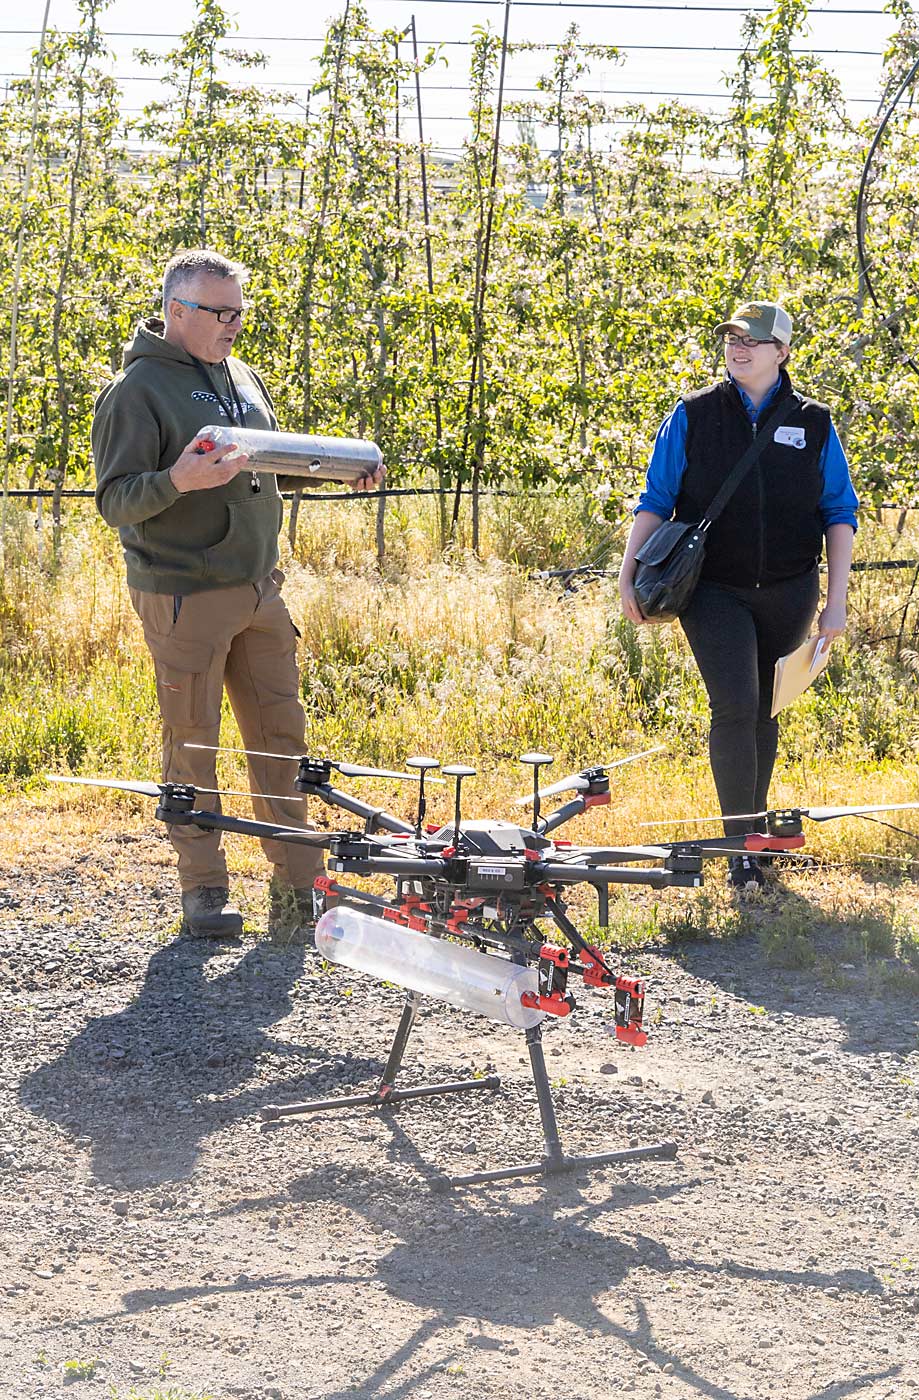 Chuck Weaver of G.S. Long explains how the Parabug drone can apply different rates and sizes of natural enemies before a demonstration during the beneficial insect tour organized by the Entomological Society of America in May. (Kate Prengaman/Good Fruit Grower)